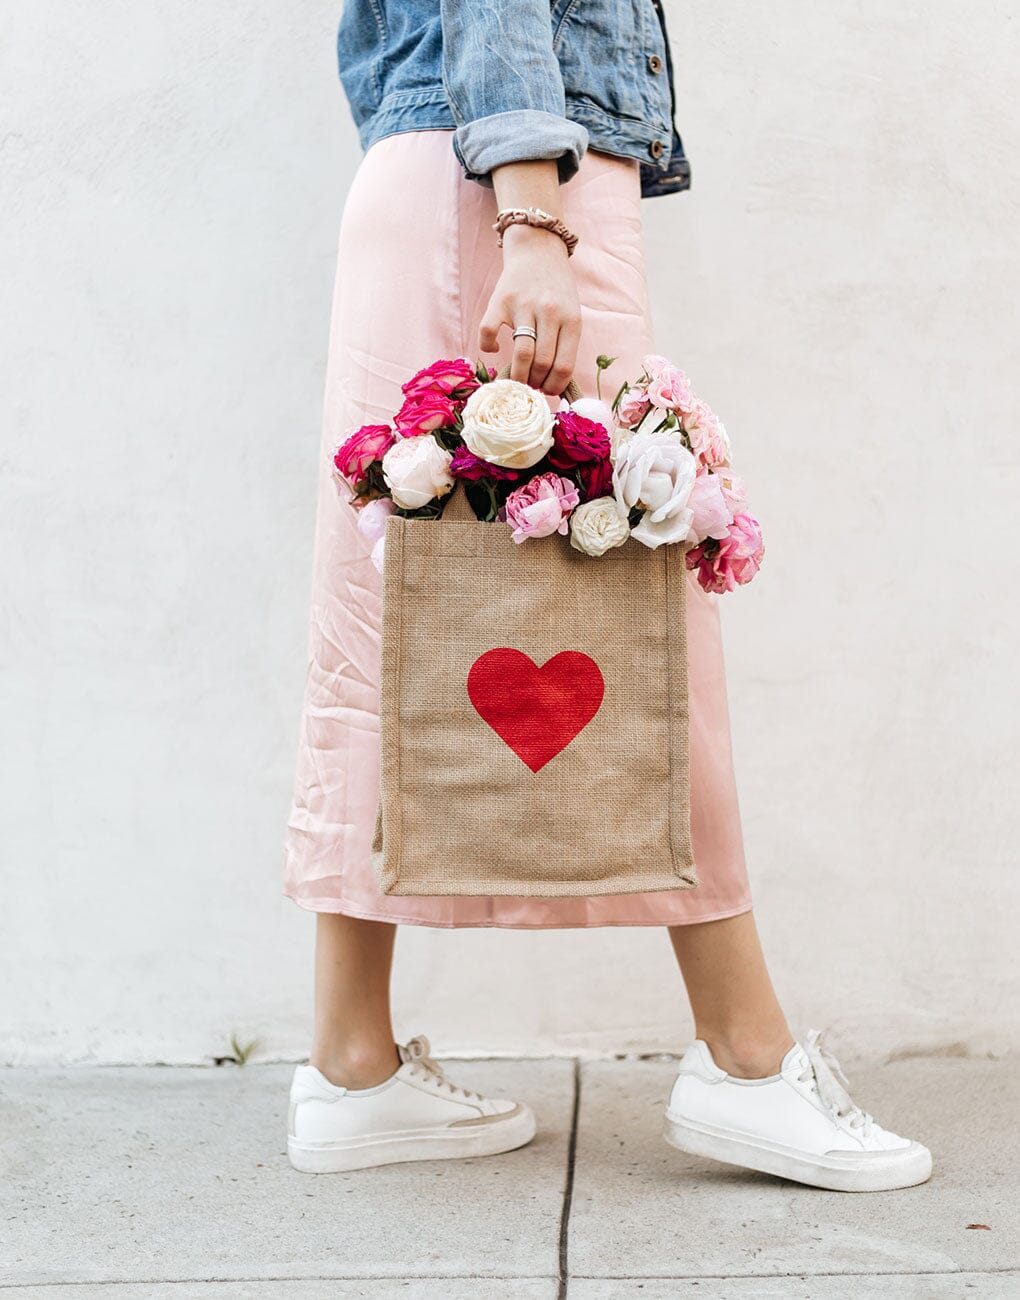 Red Heart Medium Gift Tote Bag with Flowers inside | The Little Market